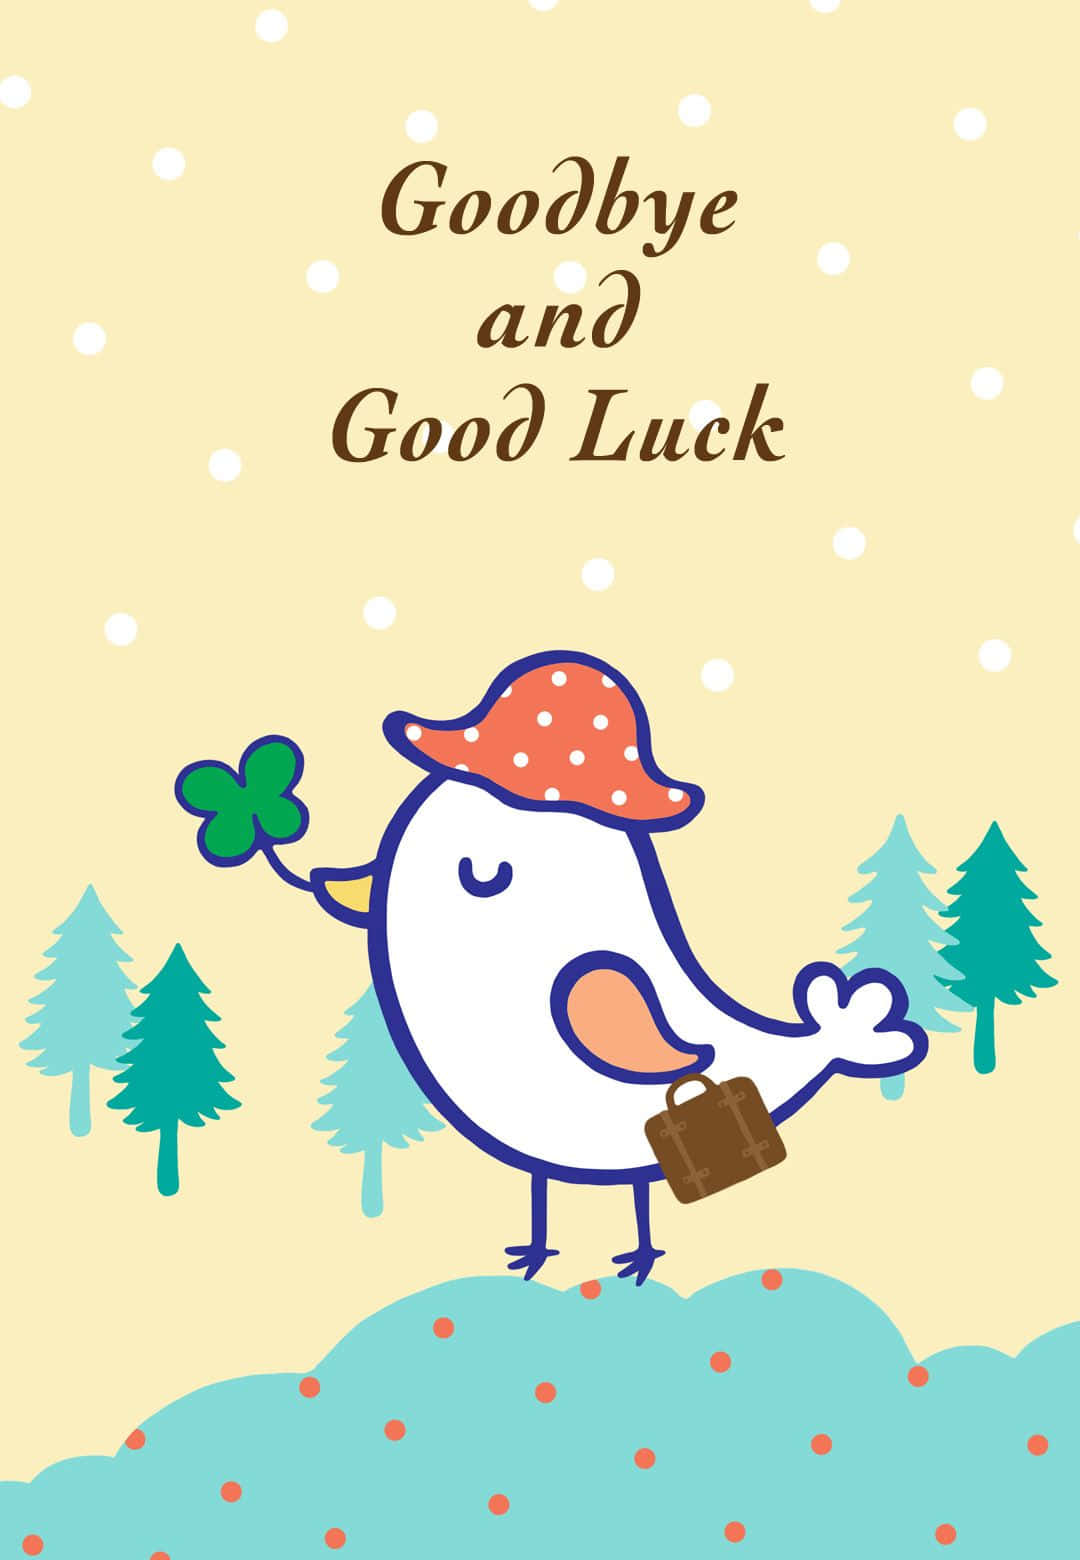 Wishing you Good Luck for all your Endeavors